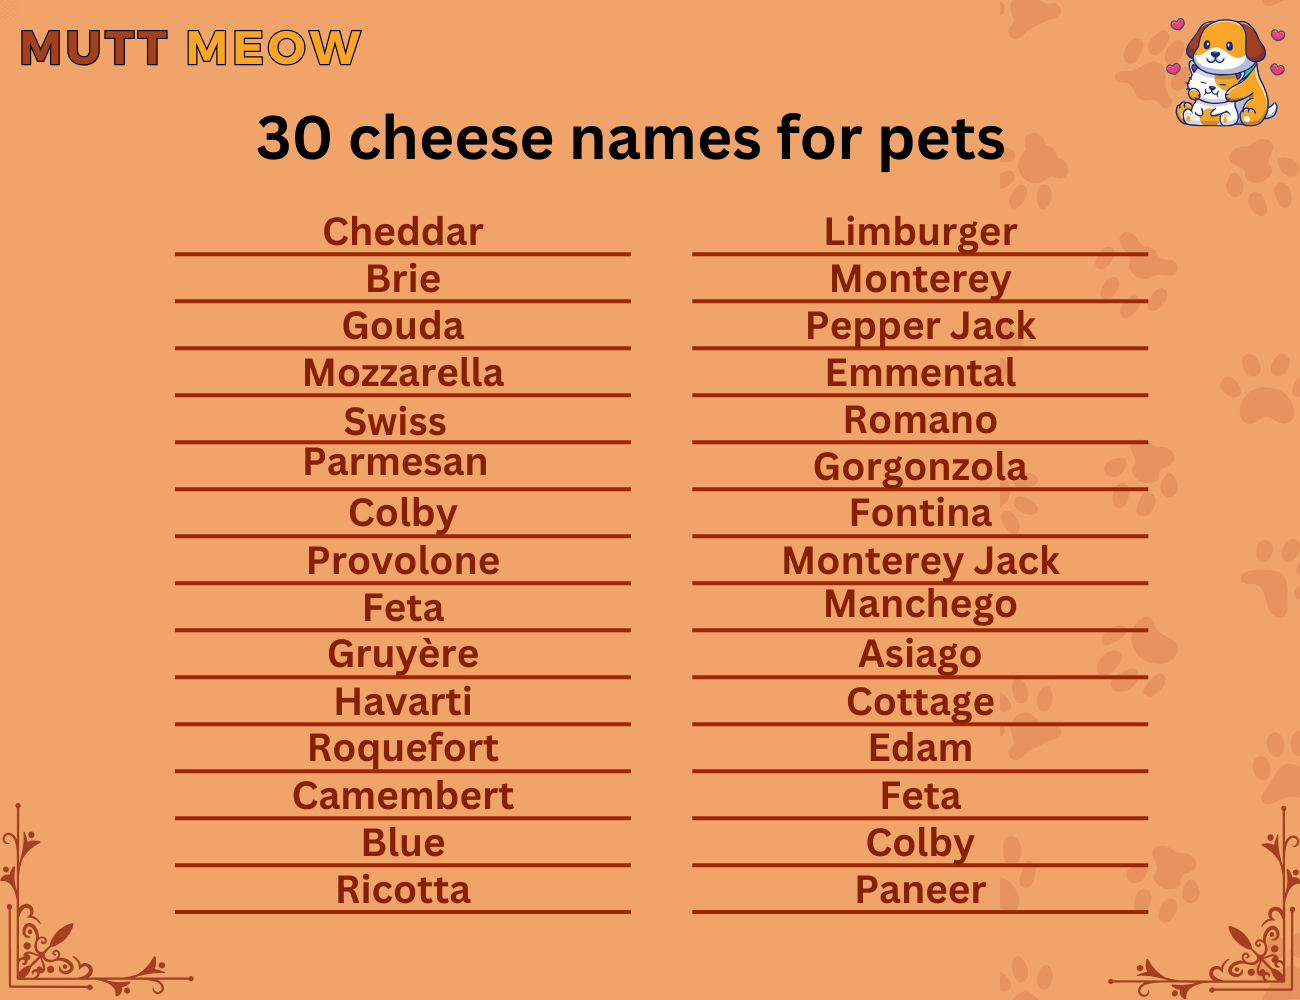 30 cheese names for pets